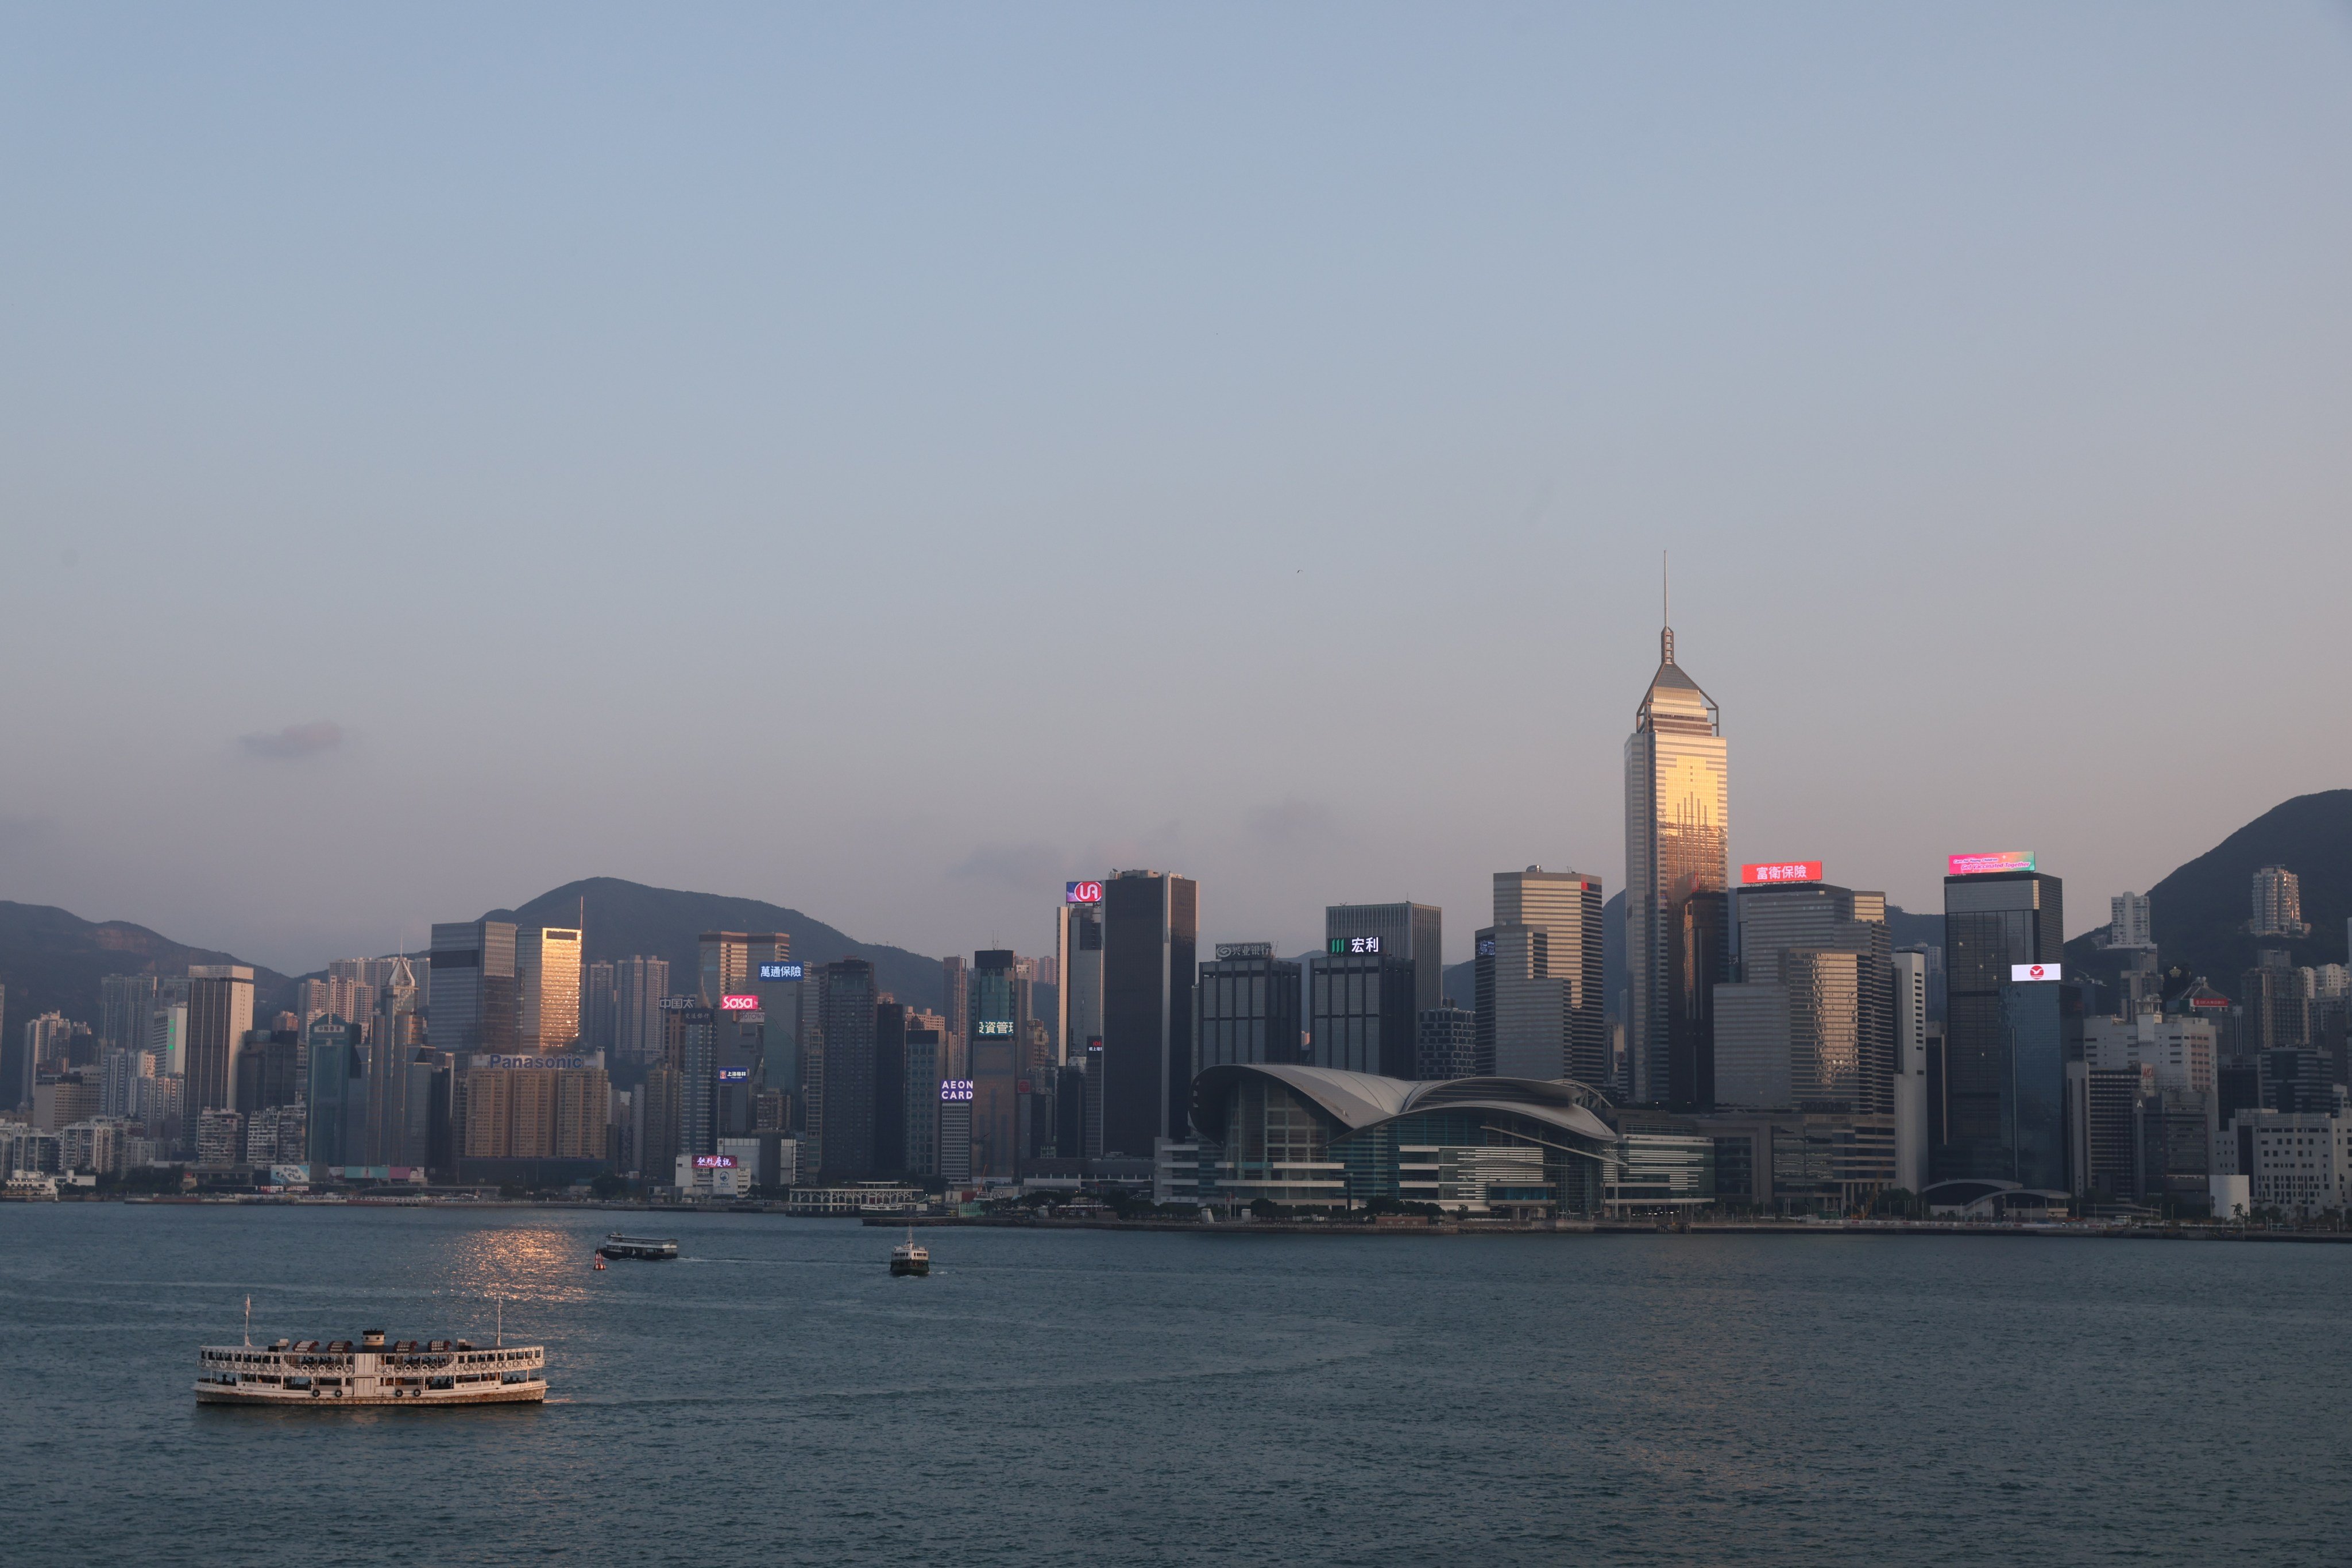 Hong Kong’s way forward is not only to compete with Singapore, but to more proactively engage overseas stakeholders at all levels and sectors. Photo: Yik Yeung-man